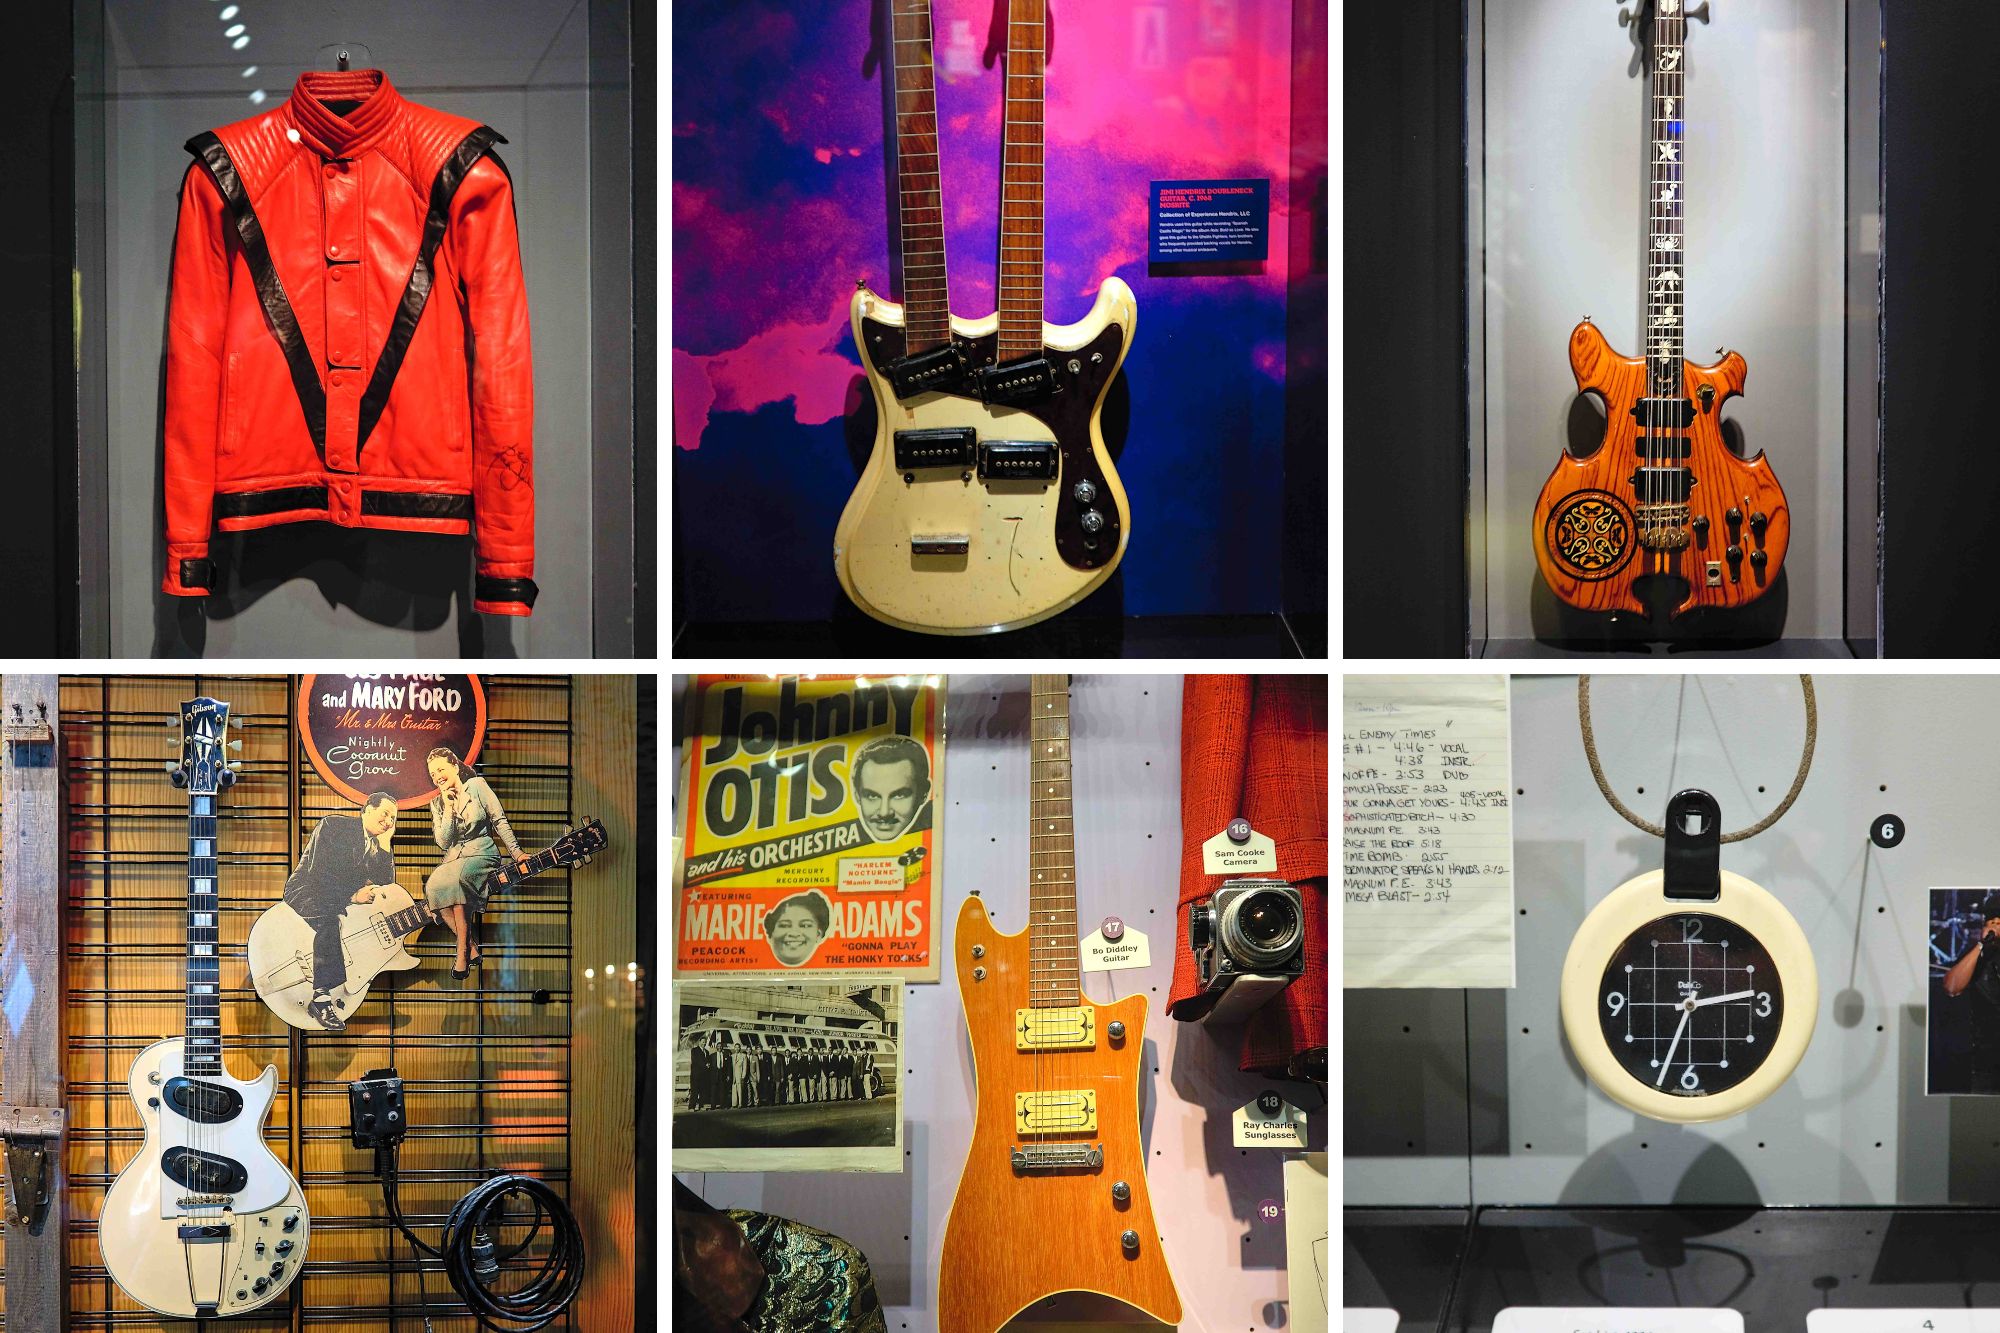 A collage of memorabilia at the Rock & Roll Hall of Fame